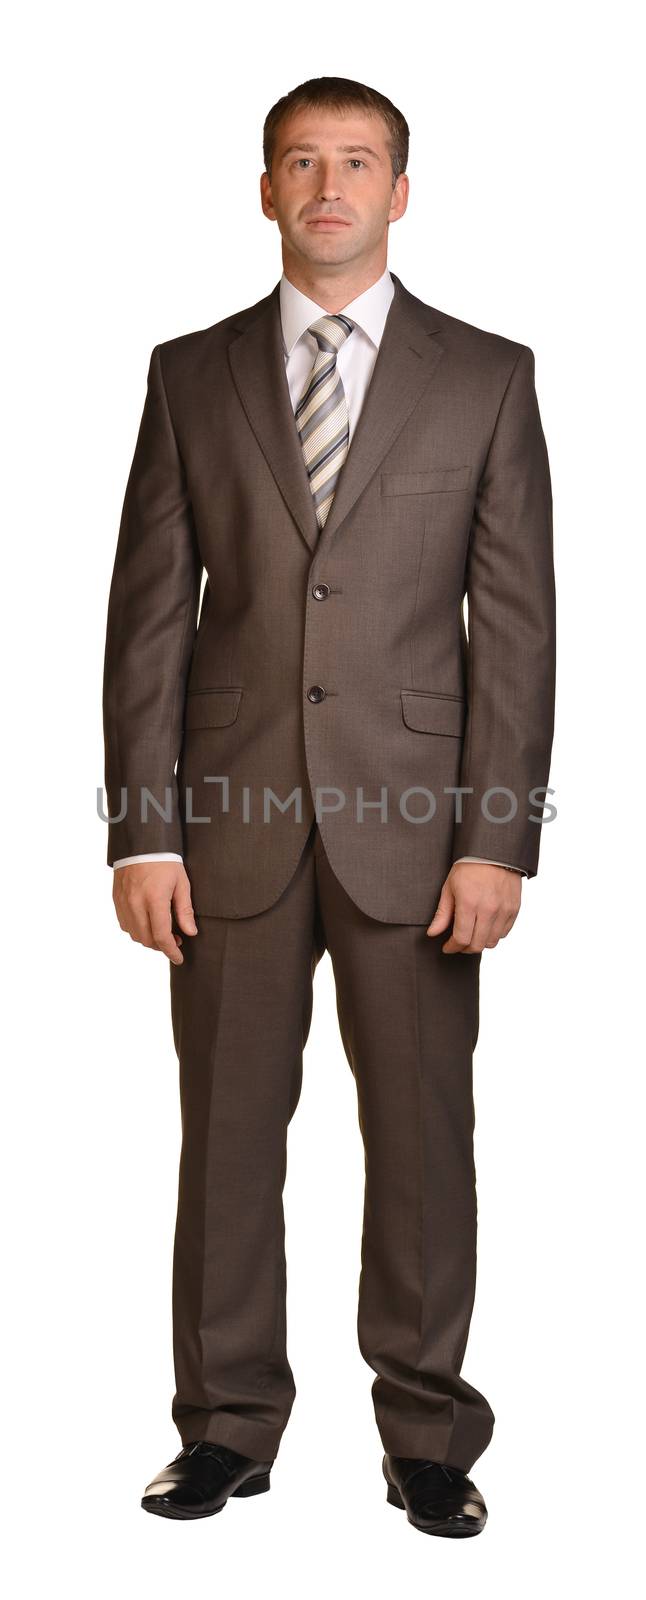 Portrait of businessman dressed in formal suit. Isolated white background